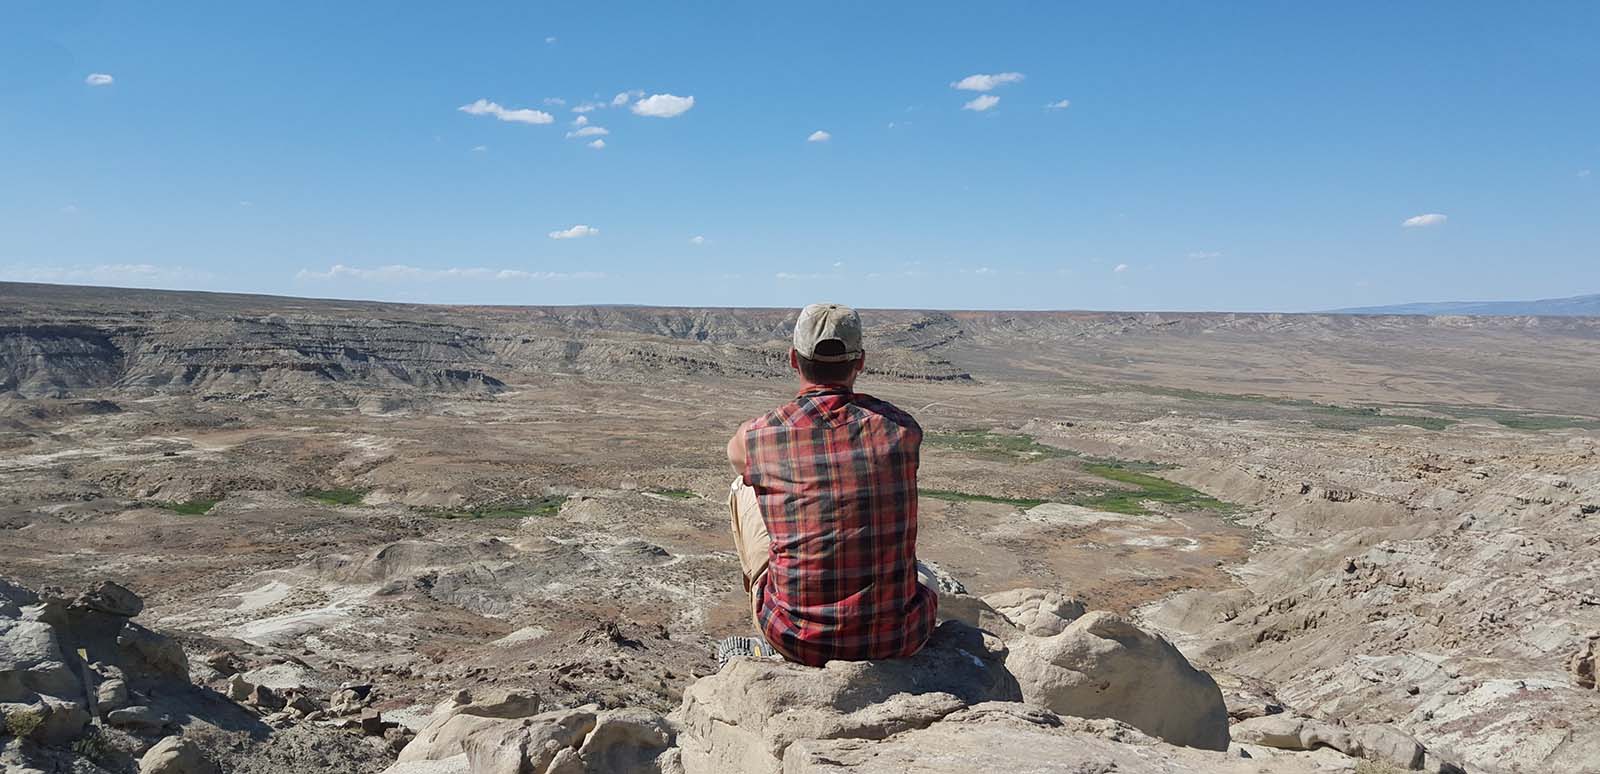 Jason Schein in the field, overlooking the landscape of the Bighorn Basin. Courtesy photograph.